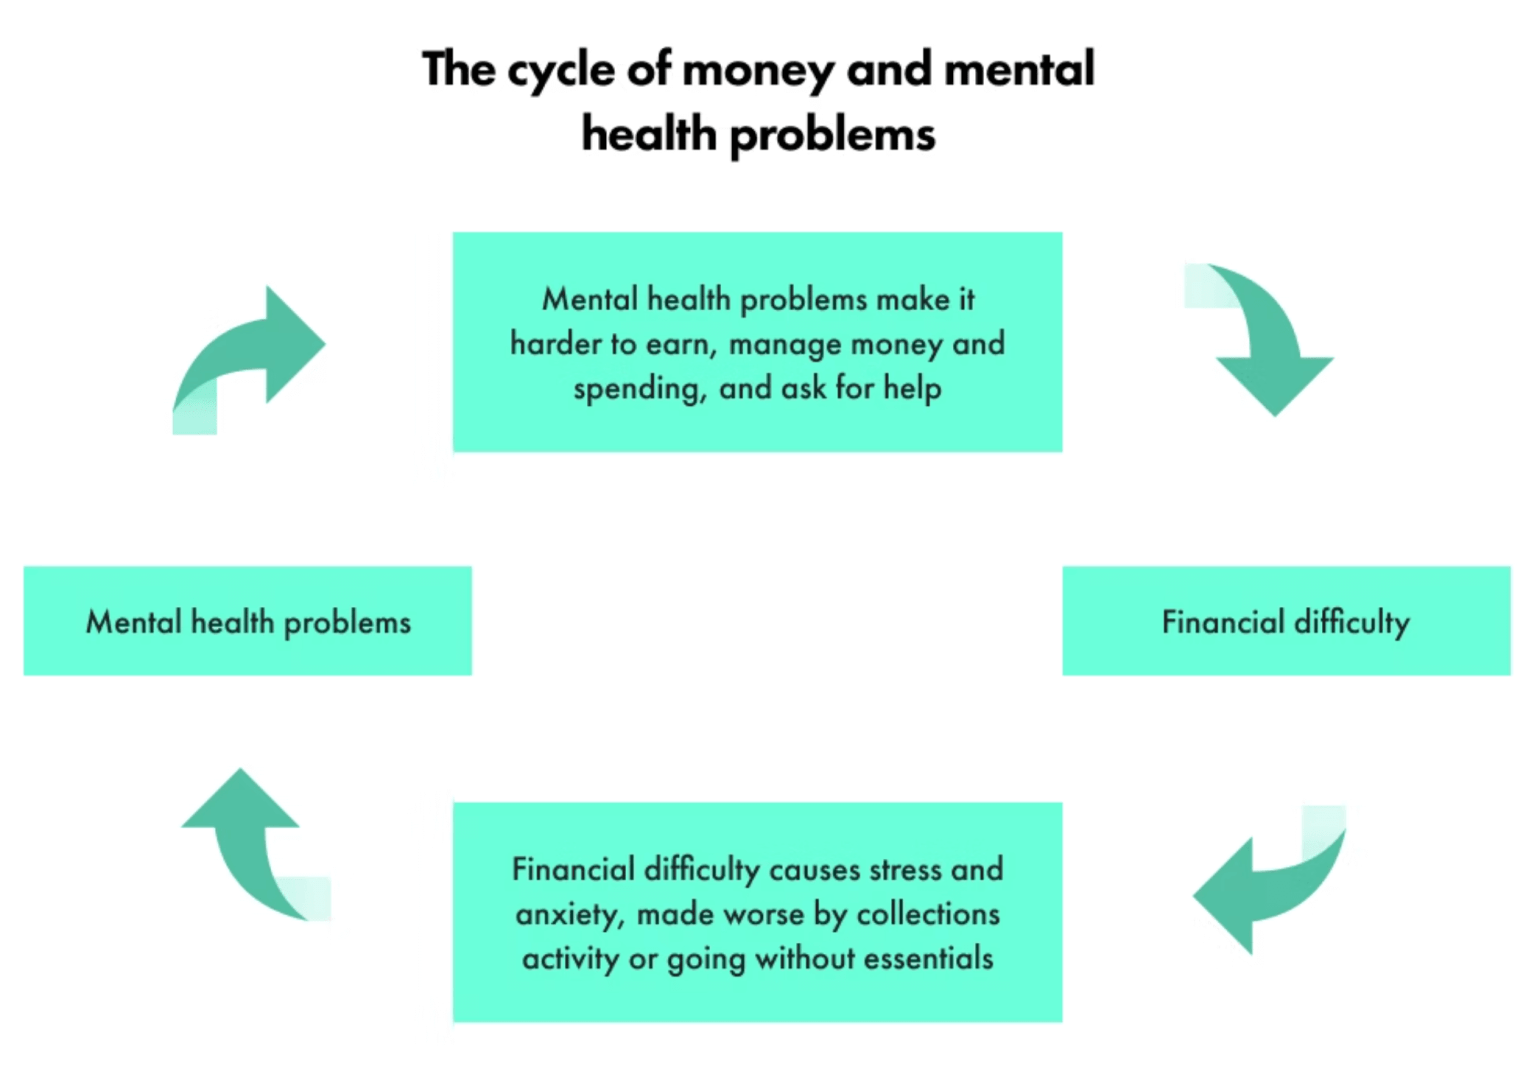 Cycle_of_Money_and_Mental_Health_Problems.png